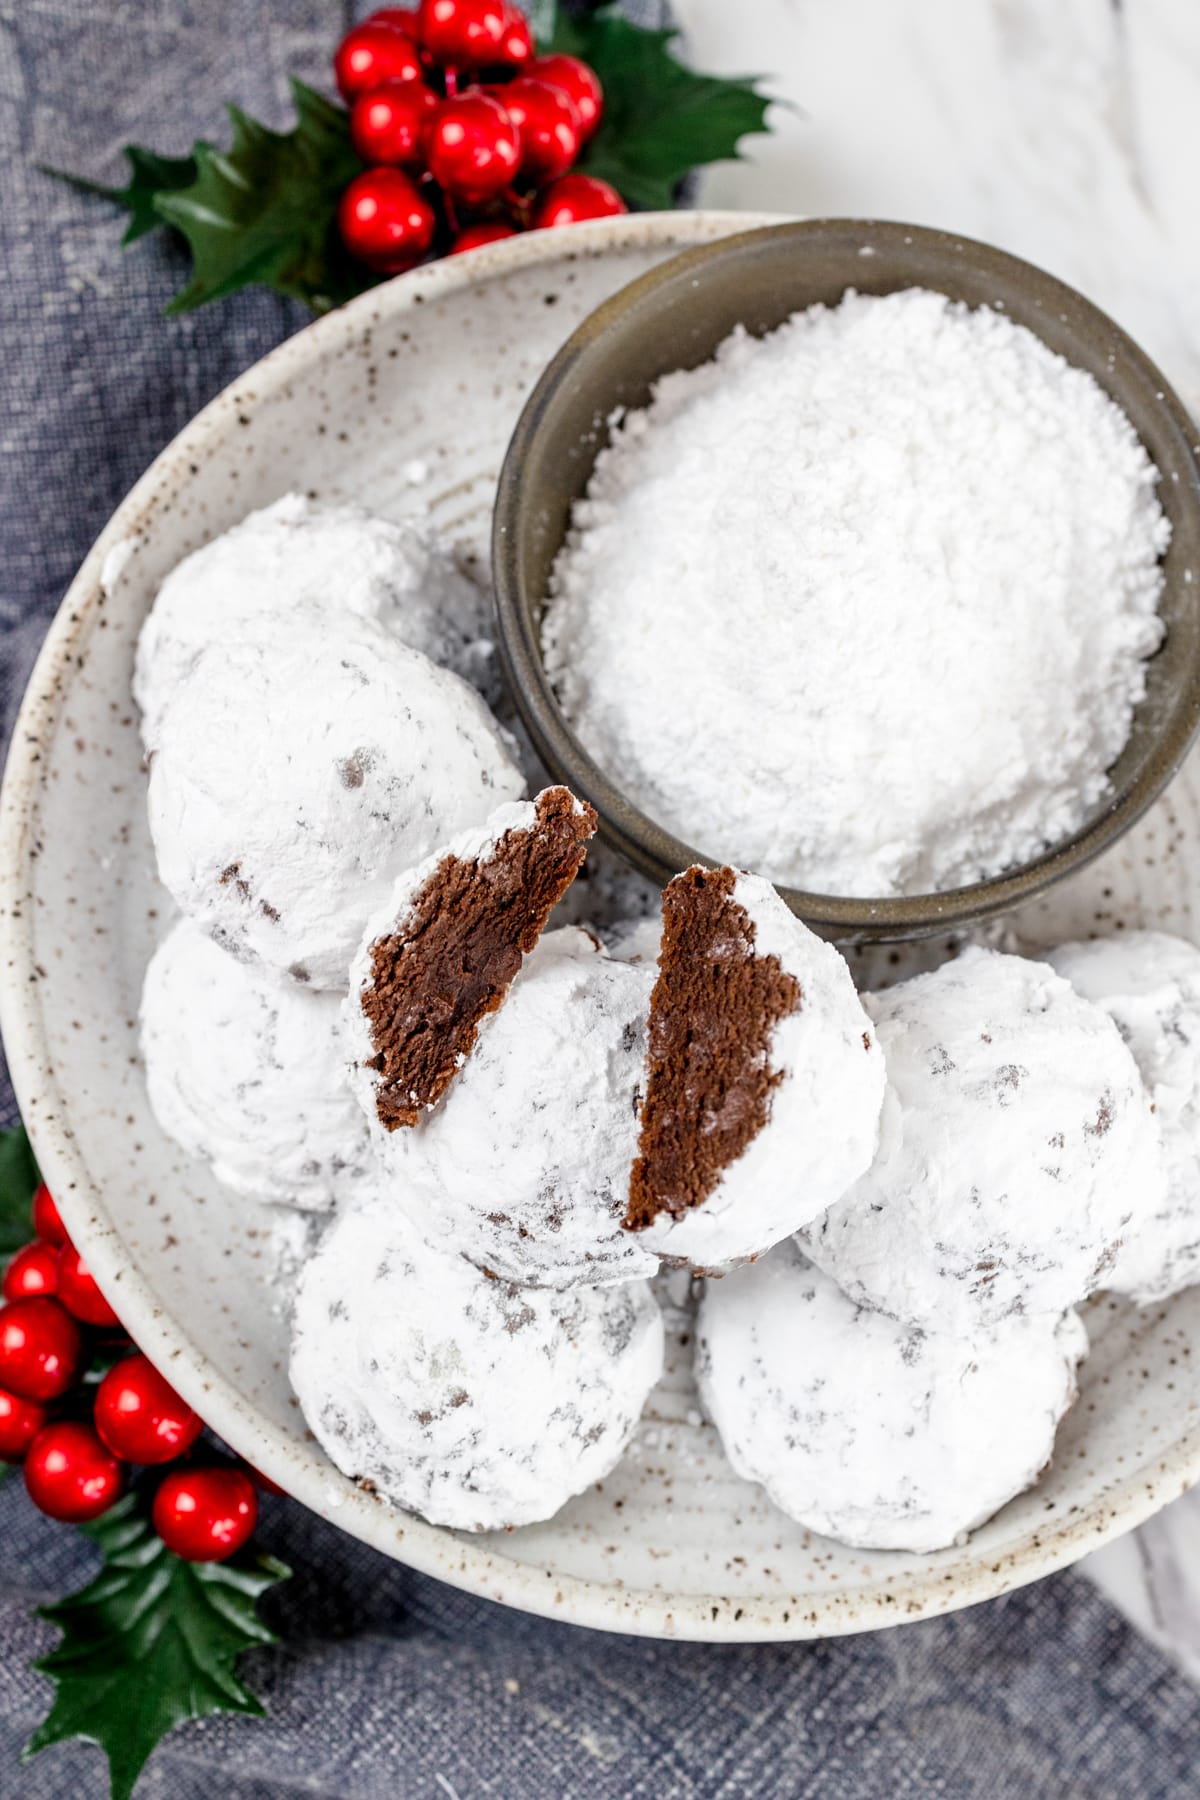 Top view of snowball cookies on a plate next to a small bowl of powdered sugar.